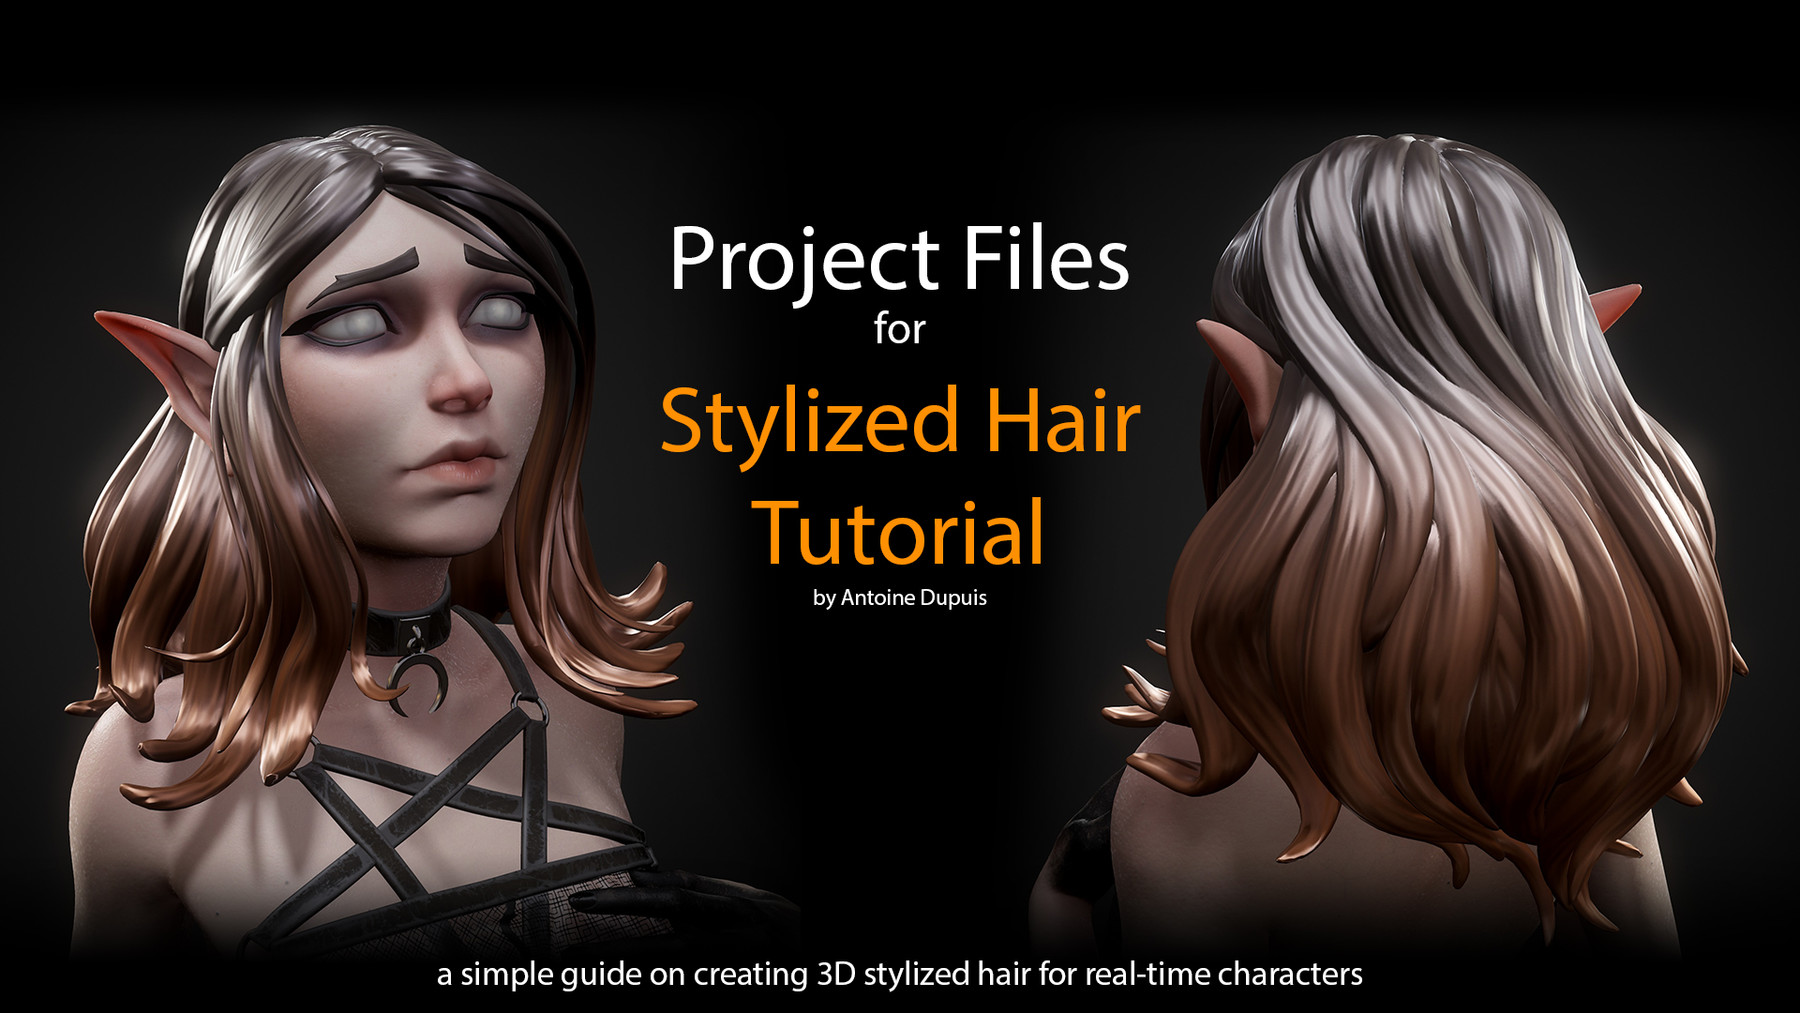 ArtStation - Stylized Hair Tutorial - PROJECT FILES | Resources